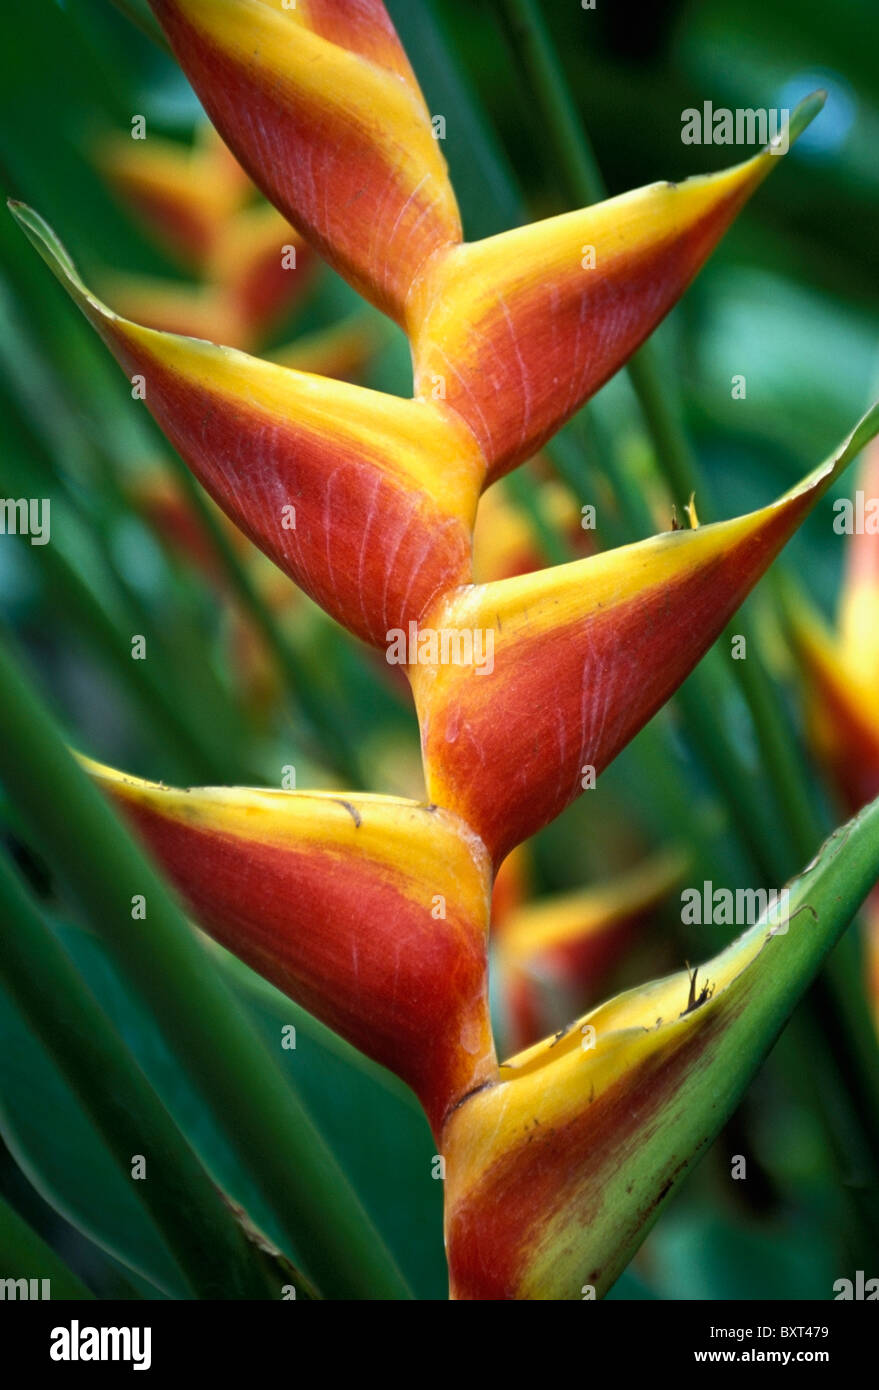 Detail Of Flower From Garden Of The Sleeping Giant, Close Up Stock Photo